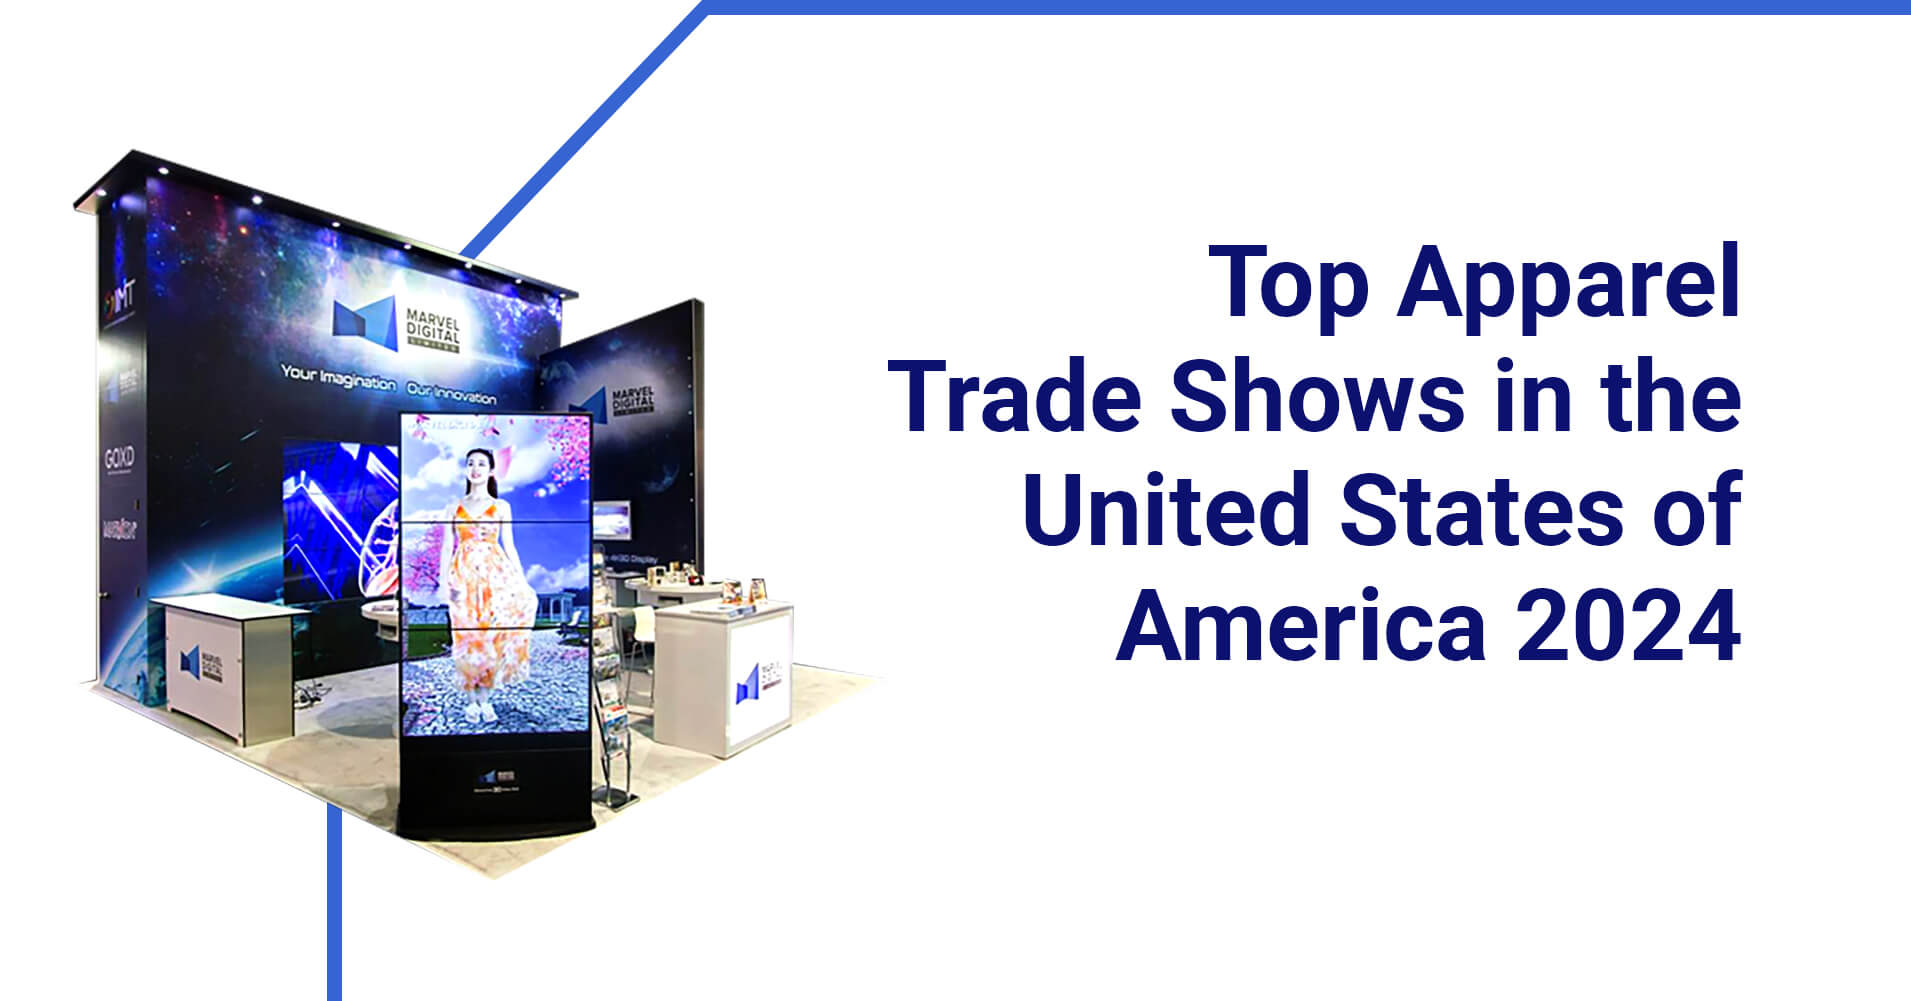 Leading Apparel Trade Shows in the USA in 2024